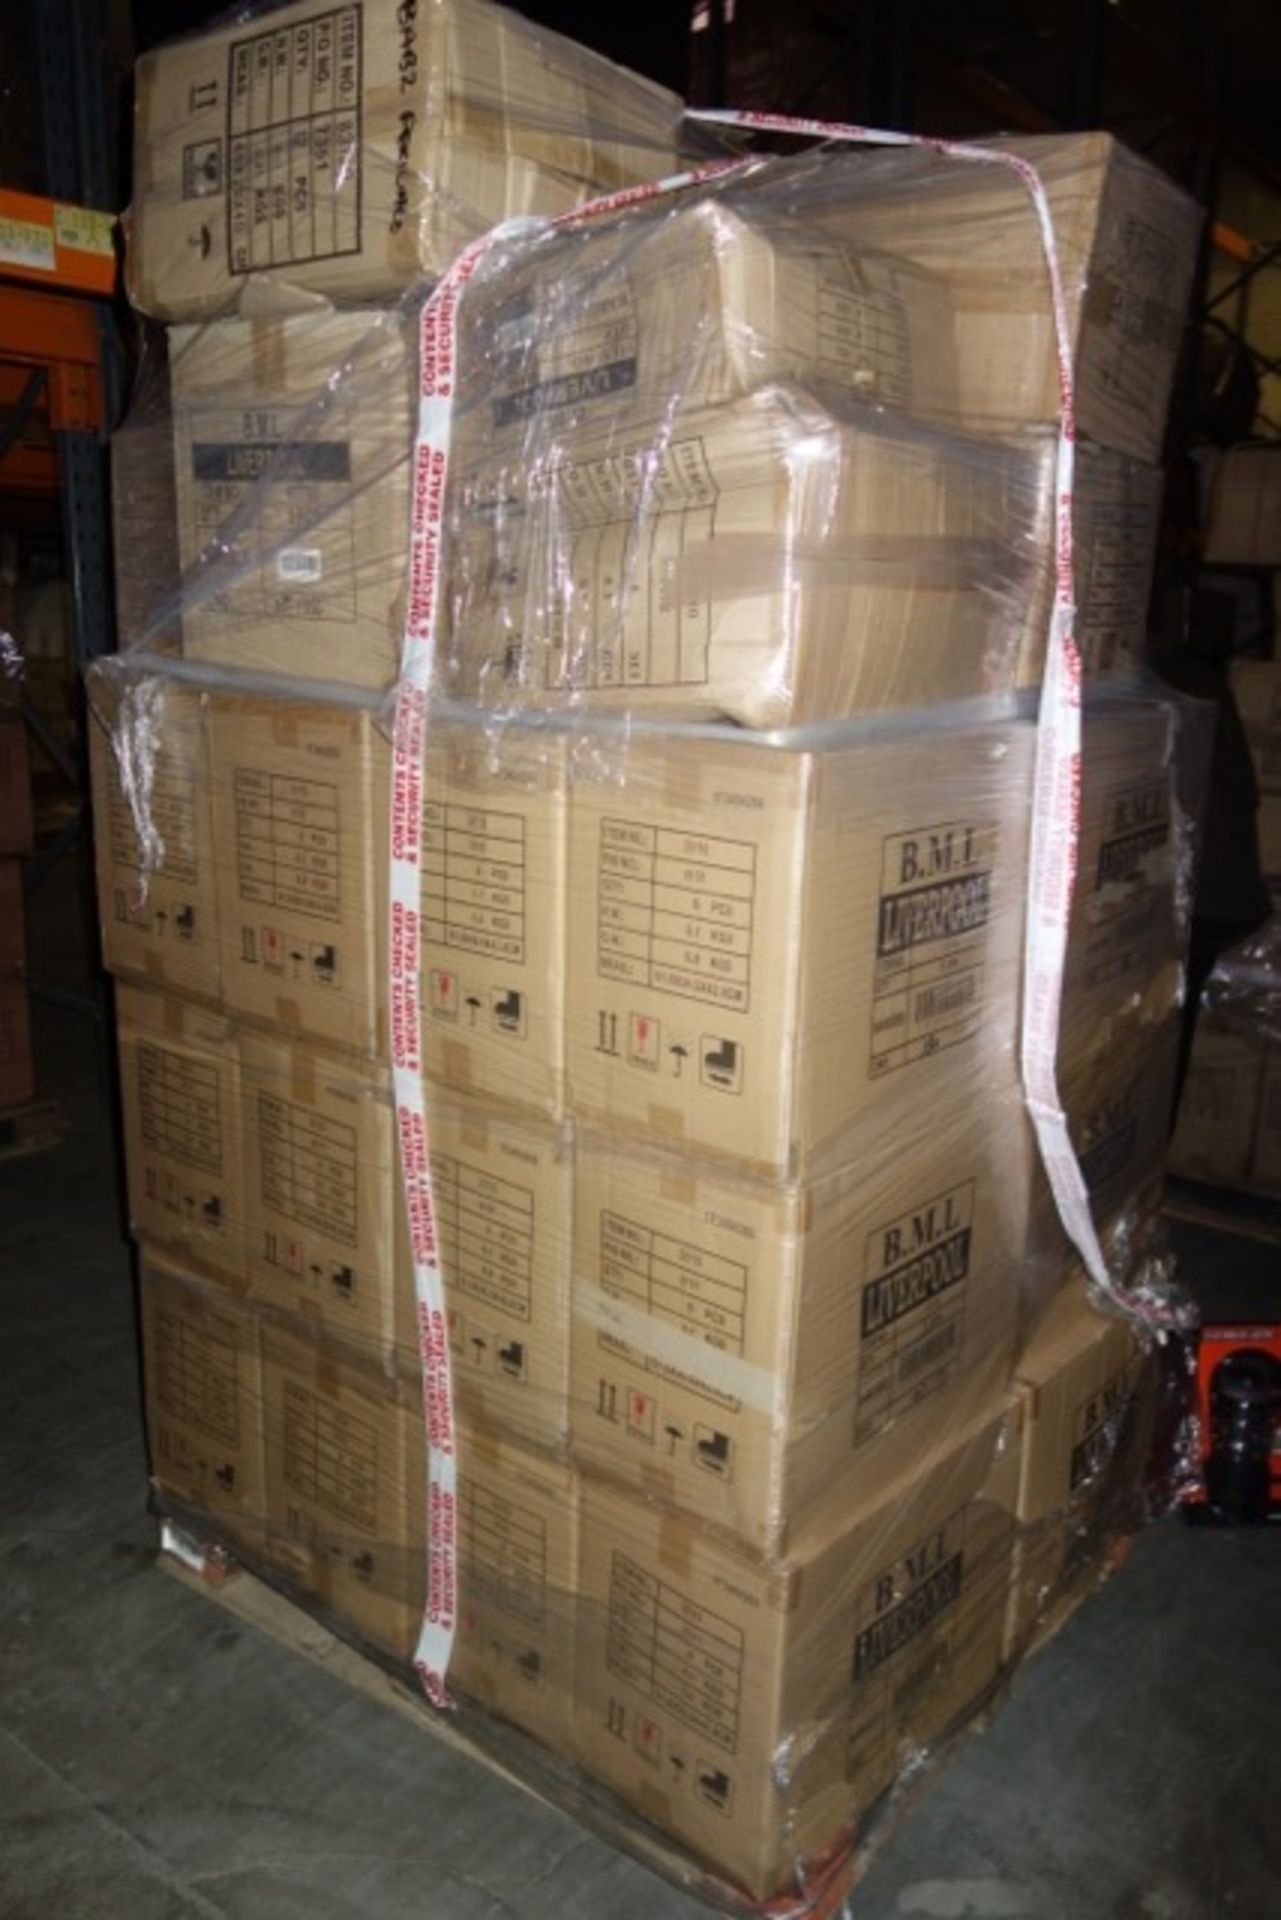 PALLET (34) CONTAINING: 132 x 700w 2 SLICE TOASTERS, 8 x 1.7L JUG KETTLE RED 2000W - Image 4 of 4